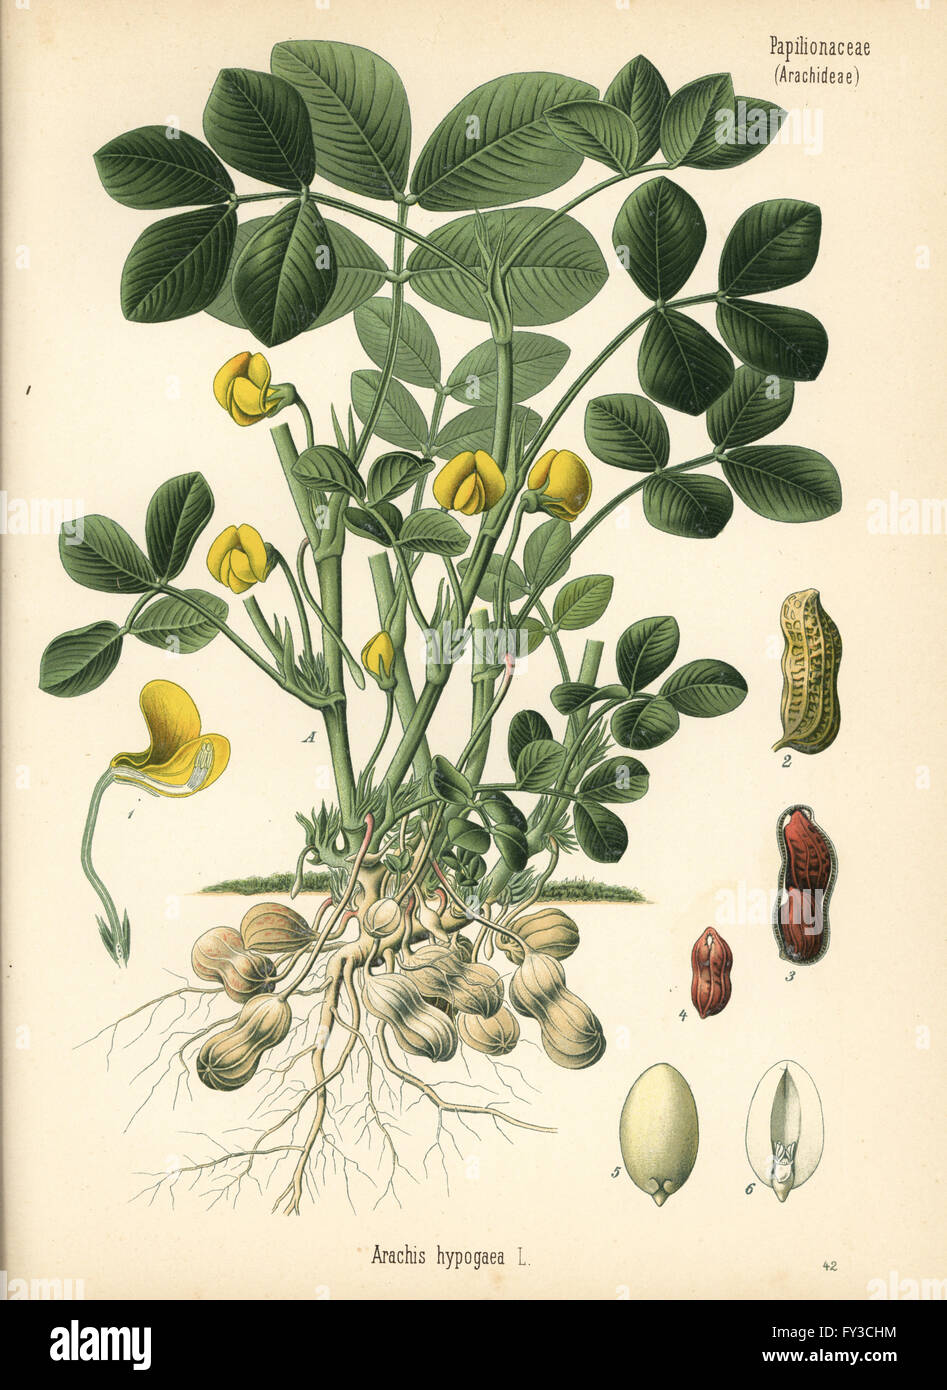 Groundnut or peanut, Arachis hypogaea. Chromolithograph after a botanical illustration from Hermann Adolph Koehler's Medicinal Plants, edited by Gustav Pabst, Koehler, Germany, 1887. Stock Photo